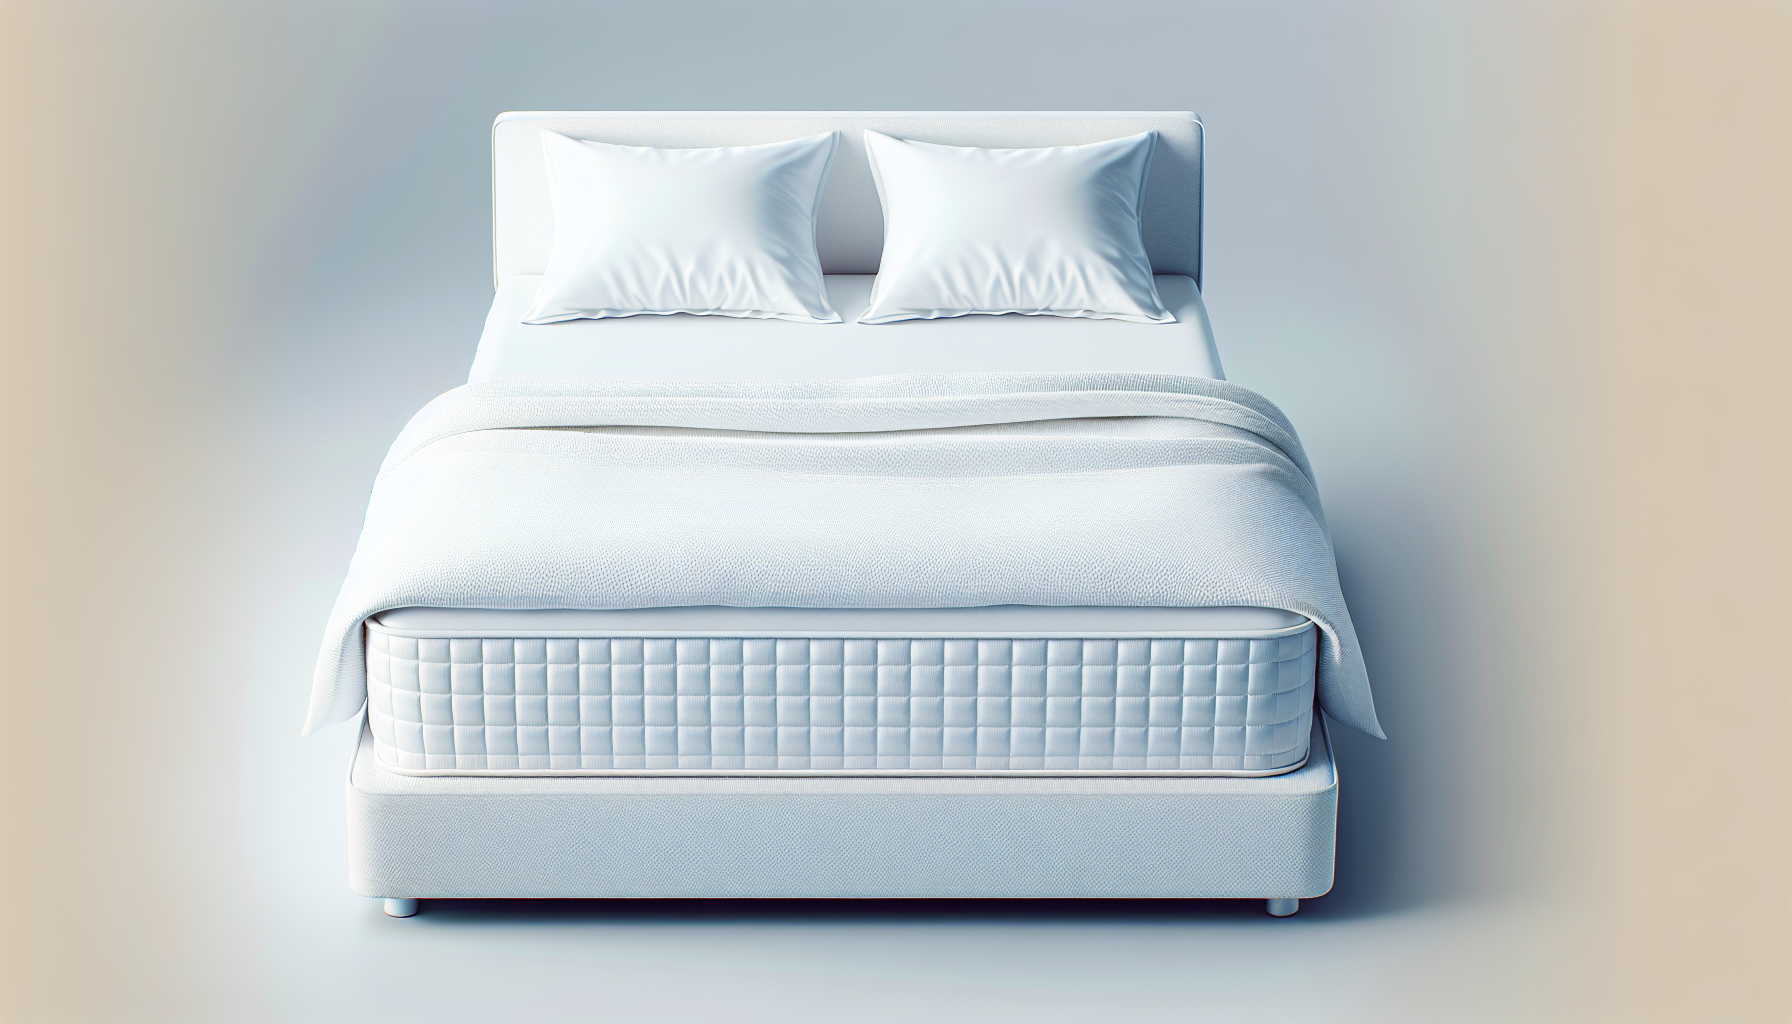 Can Scabies Live In A Mattress?